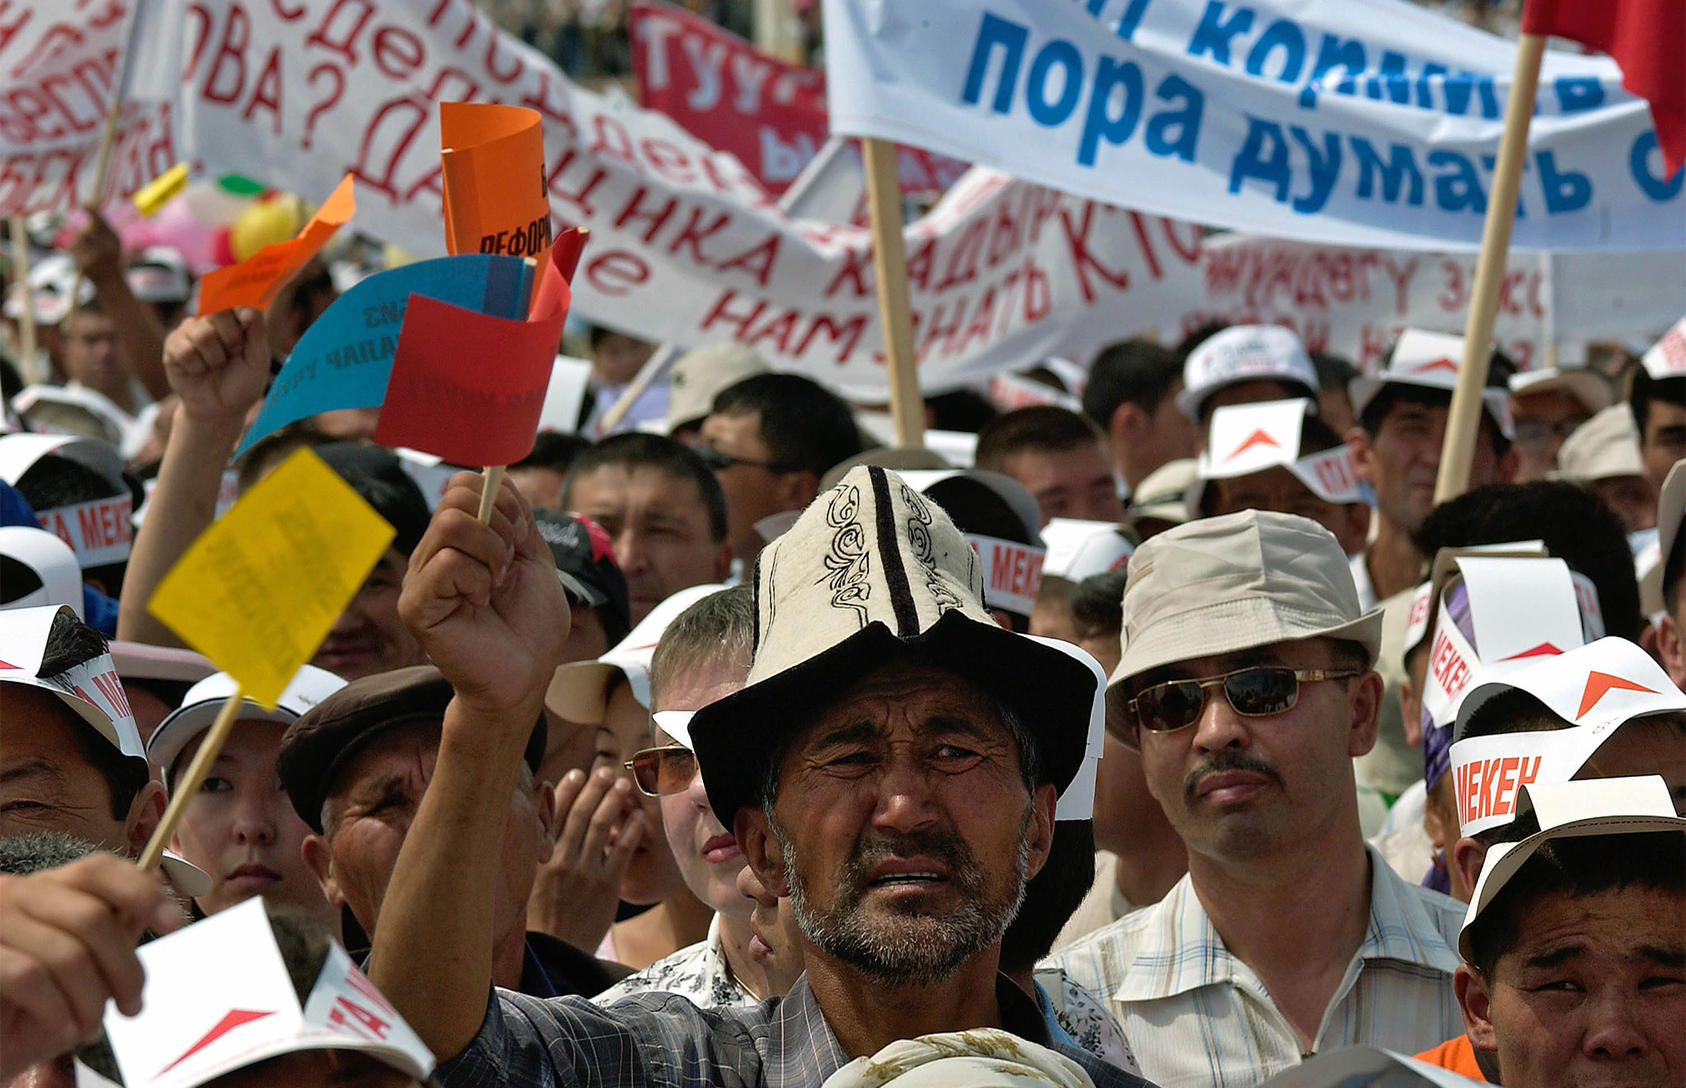 Protesters rally in Bishkek, Kyrgyzstan on Saturday, May 27, 2006. (Dean C.K. Cox/The New York Times)